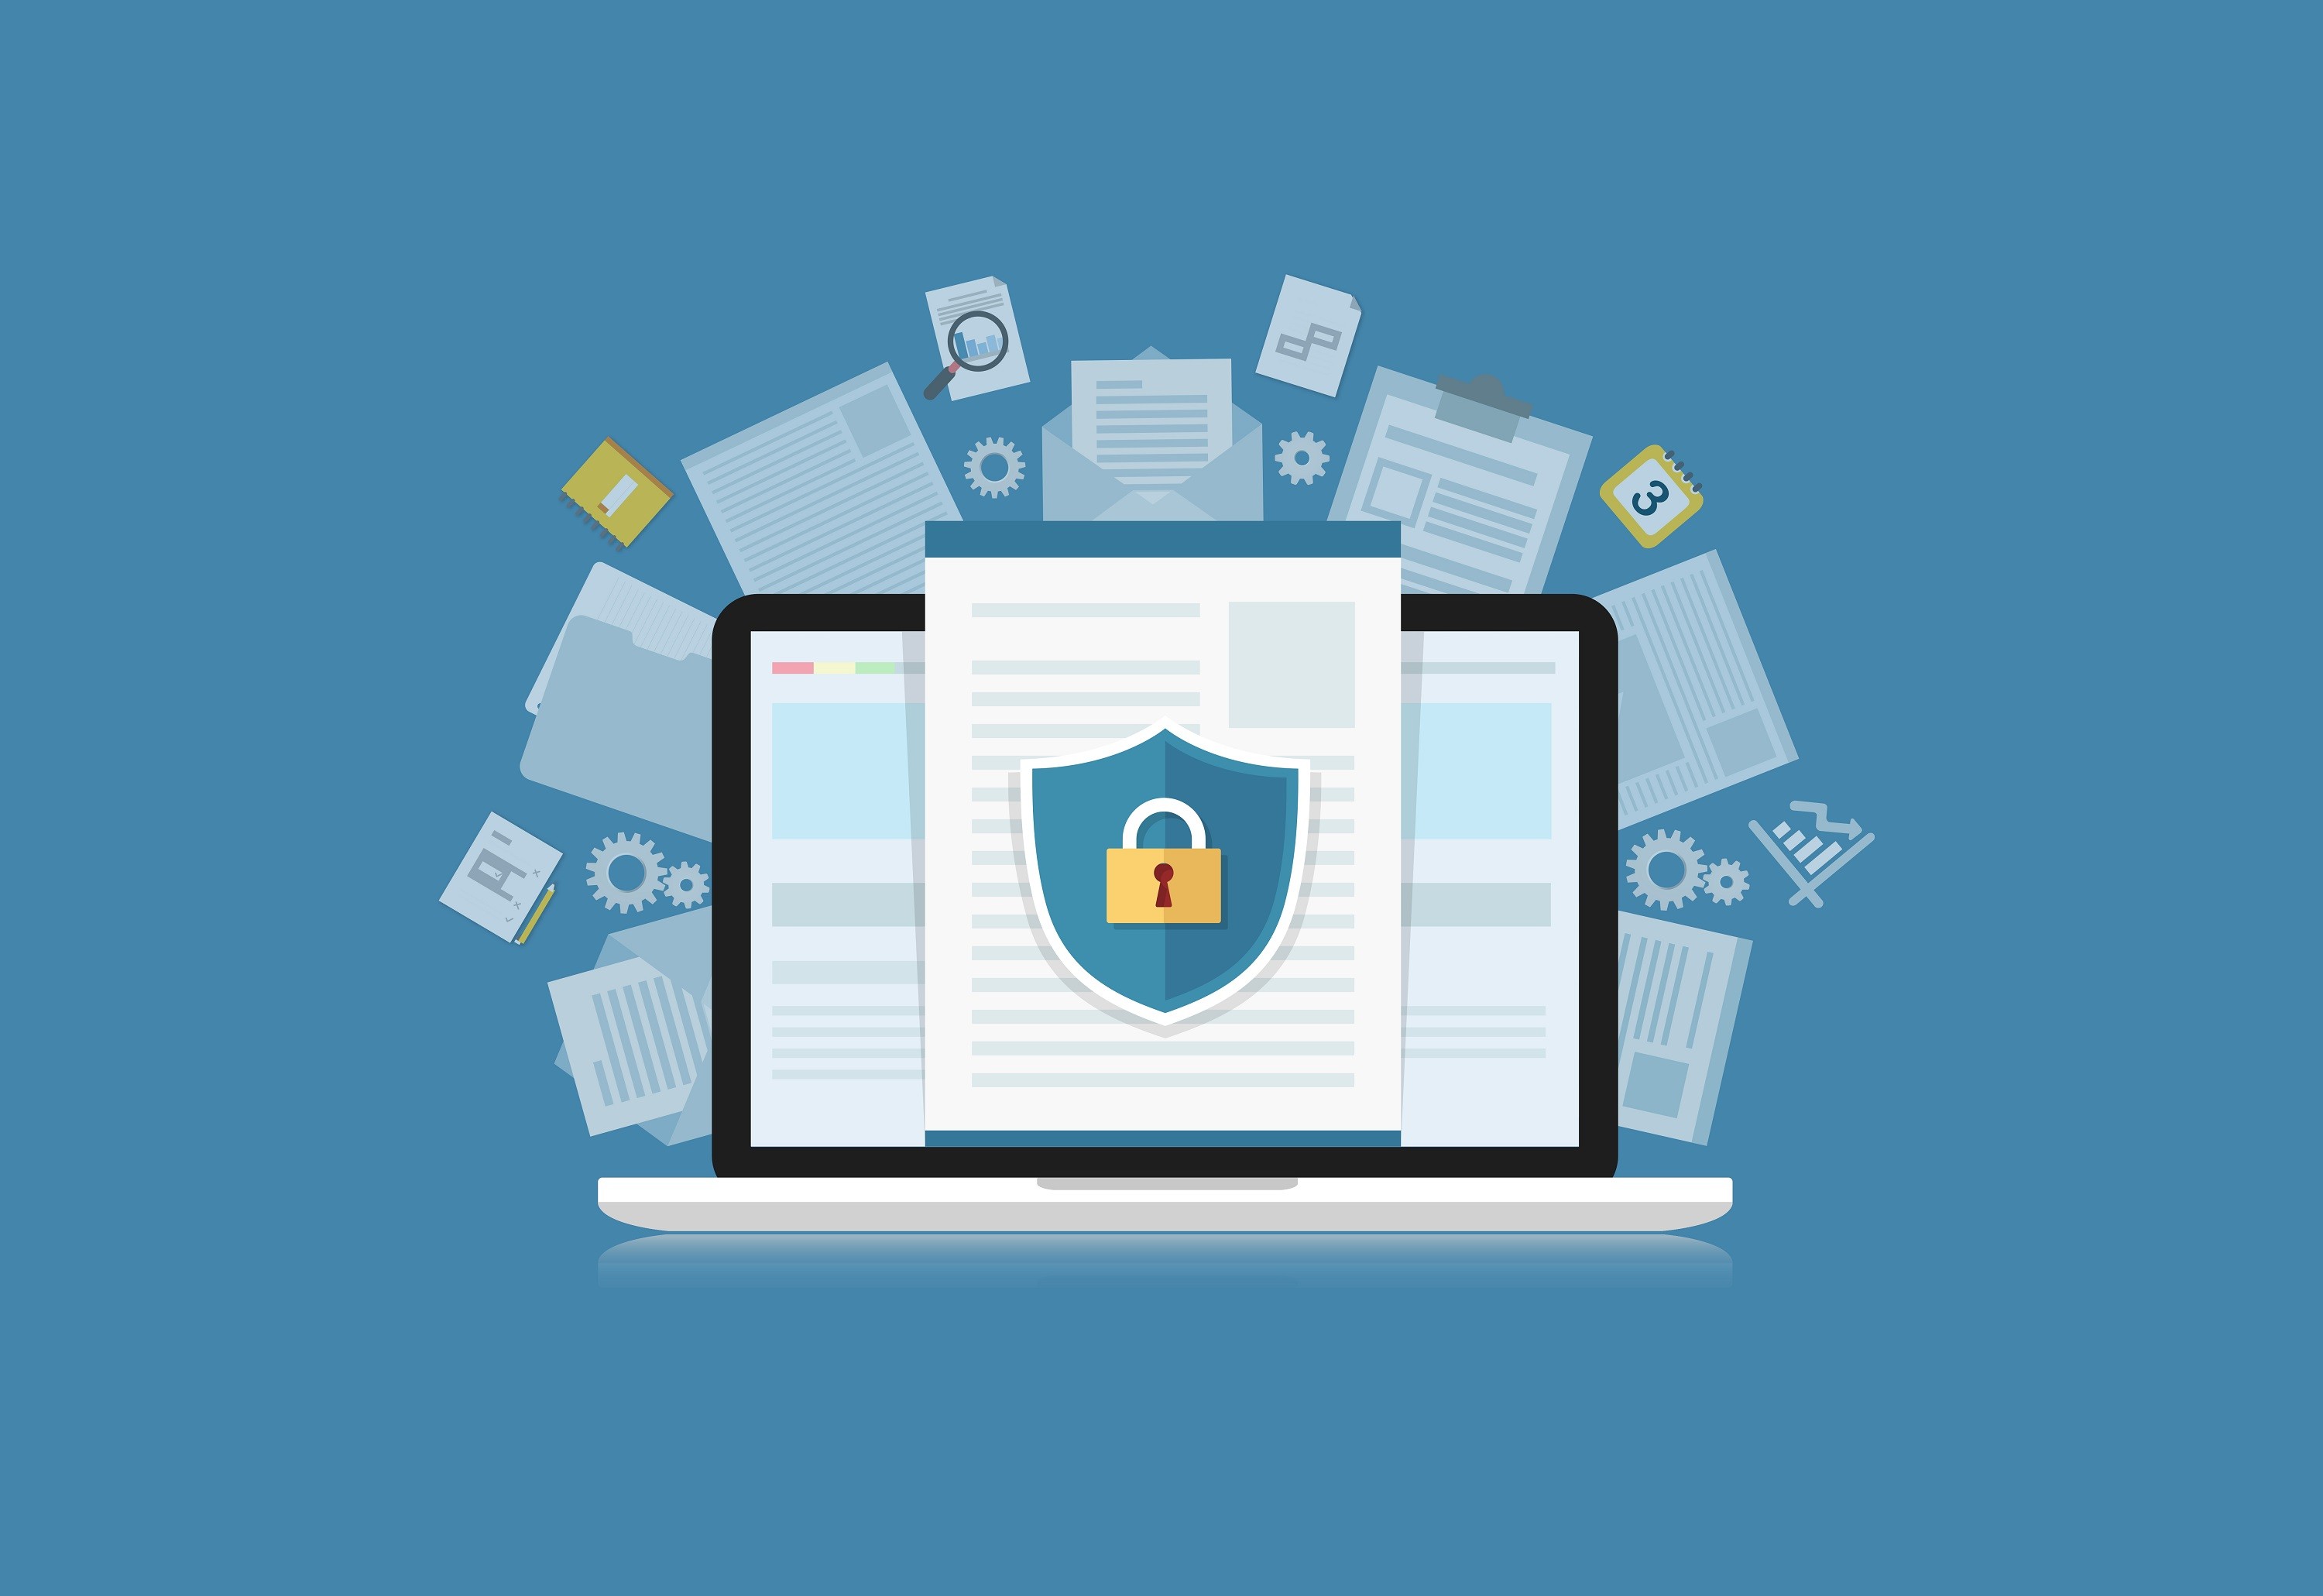 New data protection laws for marketers